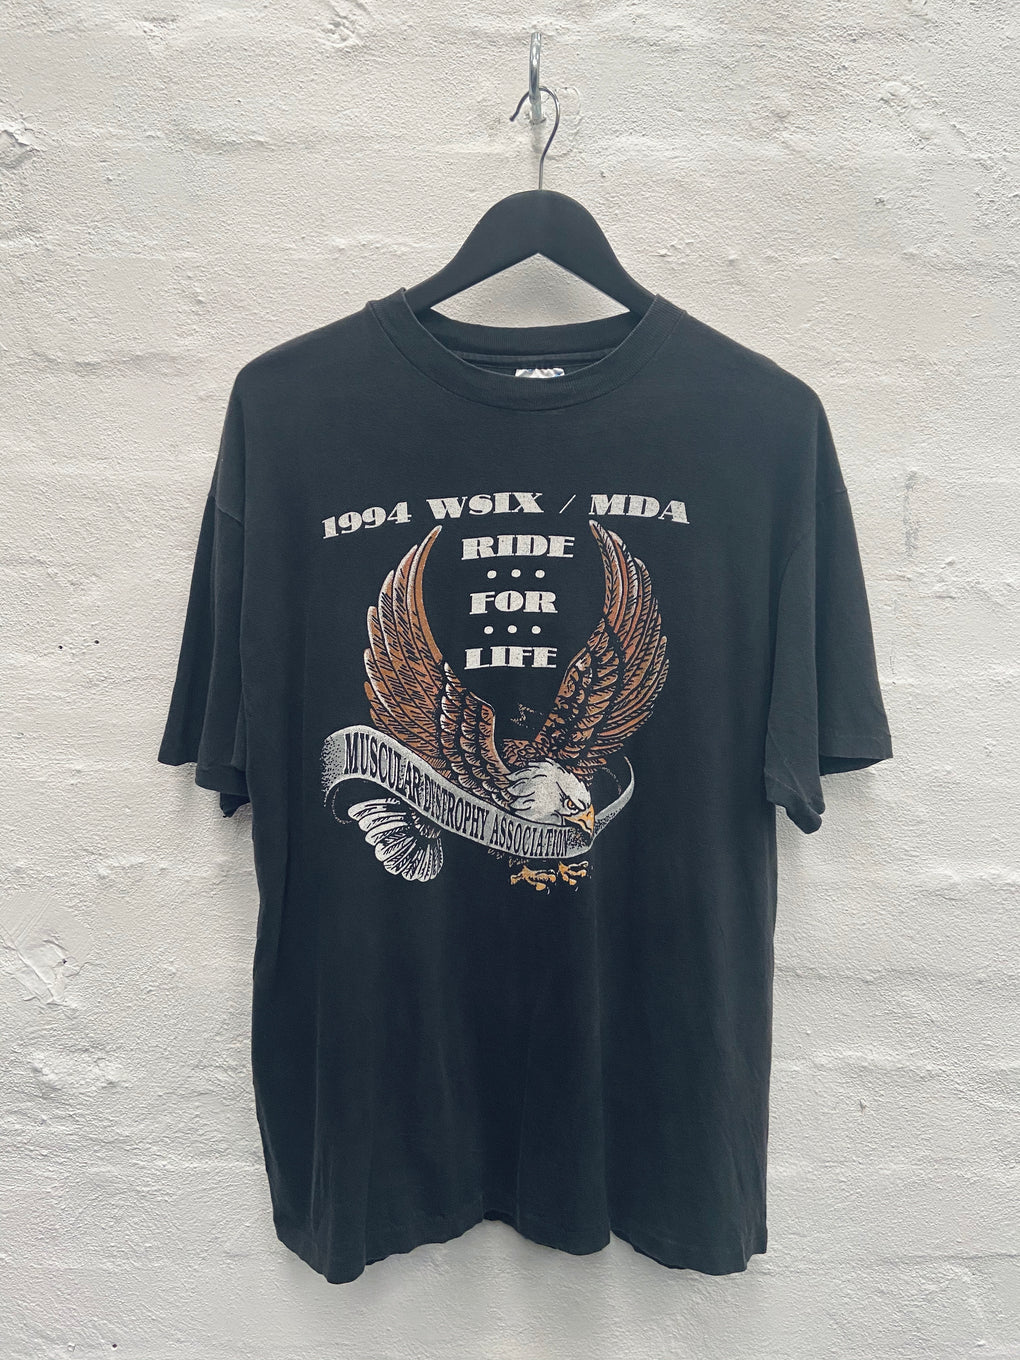 Harley Davidson 1994 Ride For Life Tee (L)